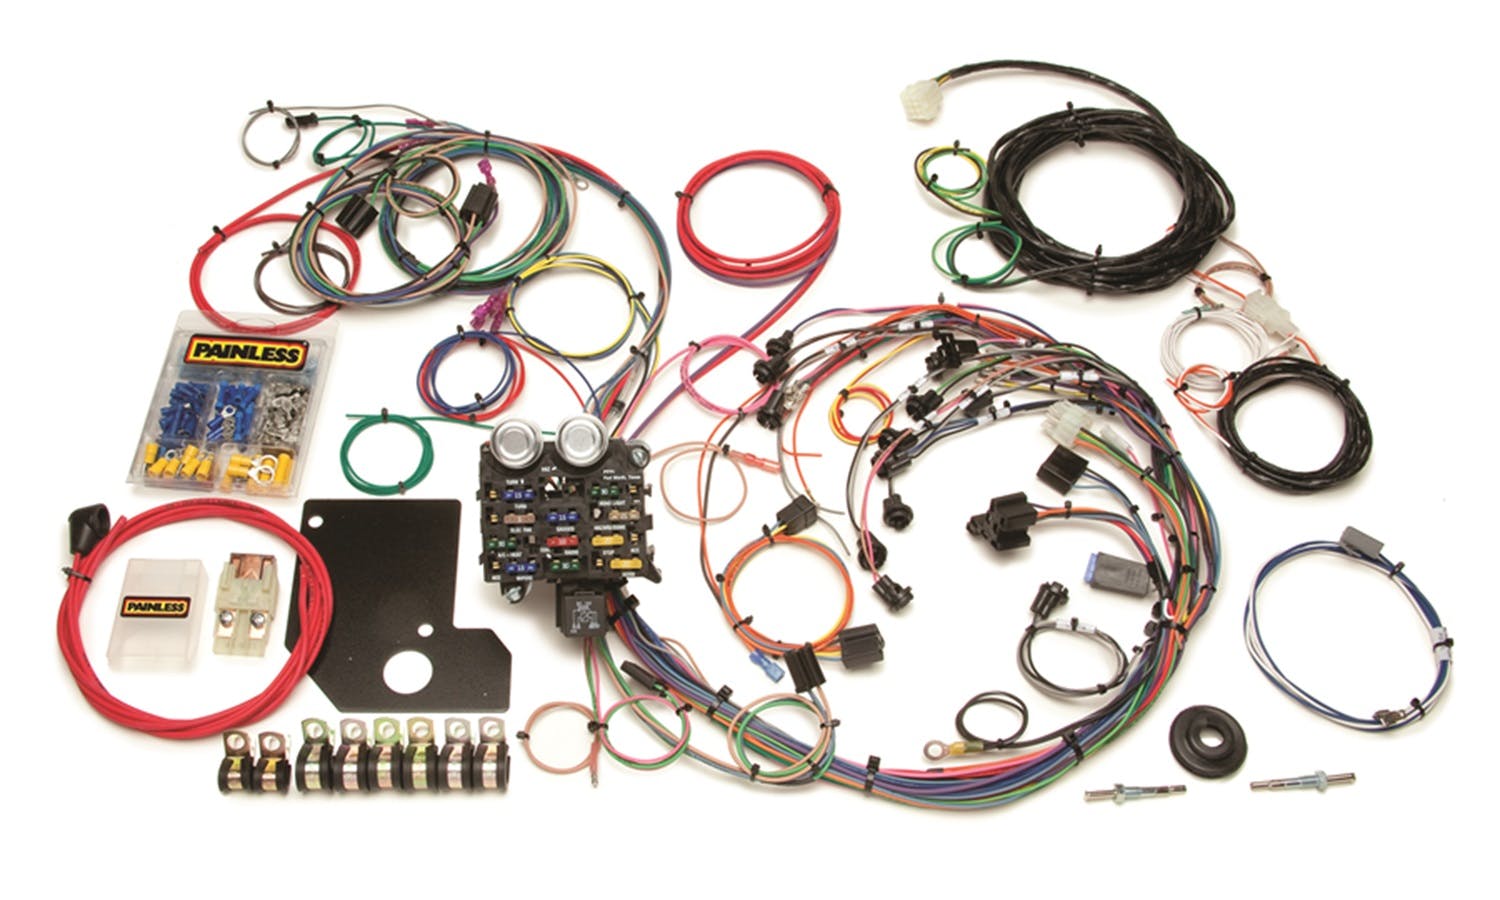 Painless 20110 21 Circuit Wiring Harness